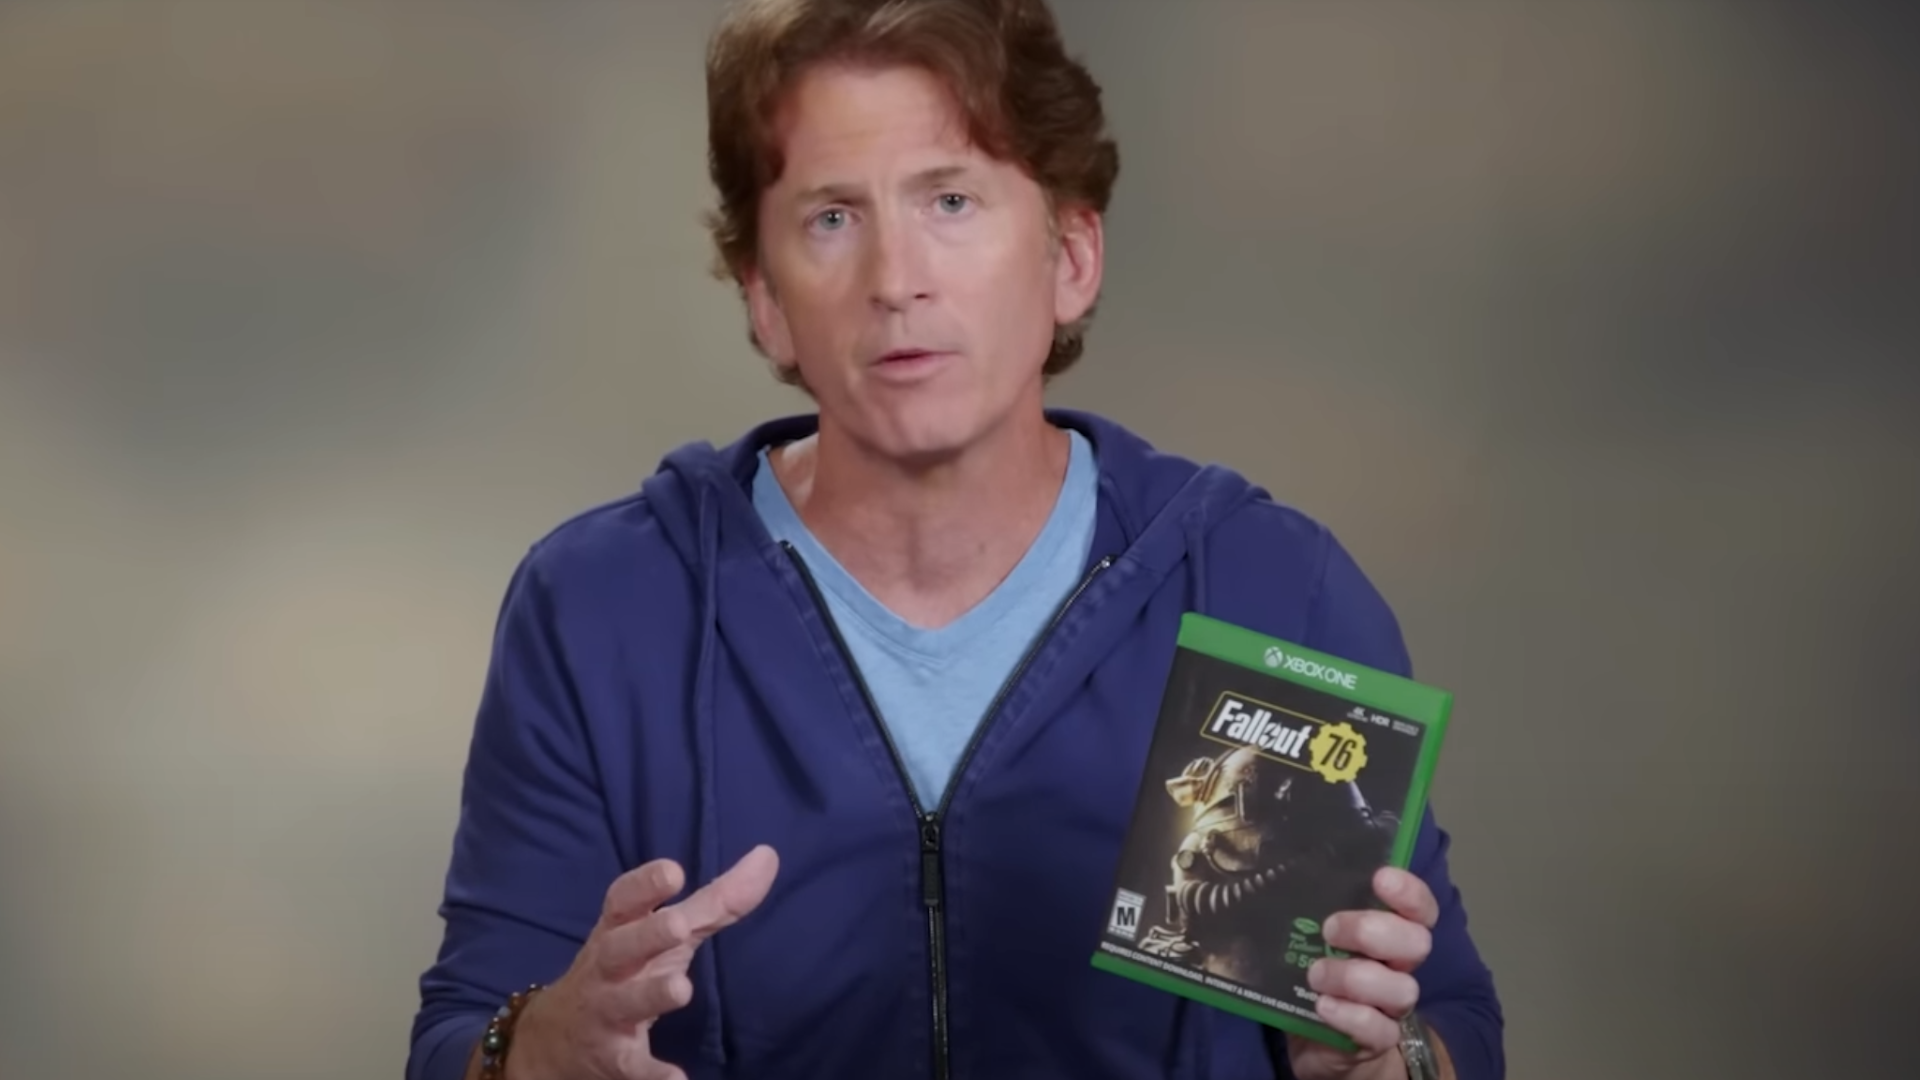 Todd Howard wants to preserve the 'Americana naivete' by keeping Fallout mostly based in the USA: 'keep the mysterious lands mysterious'